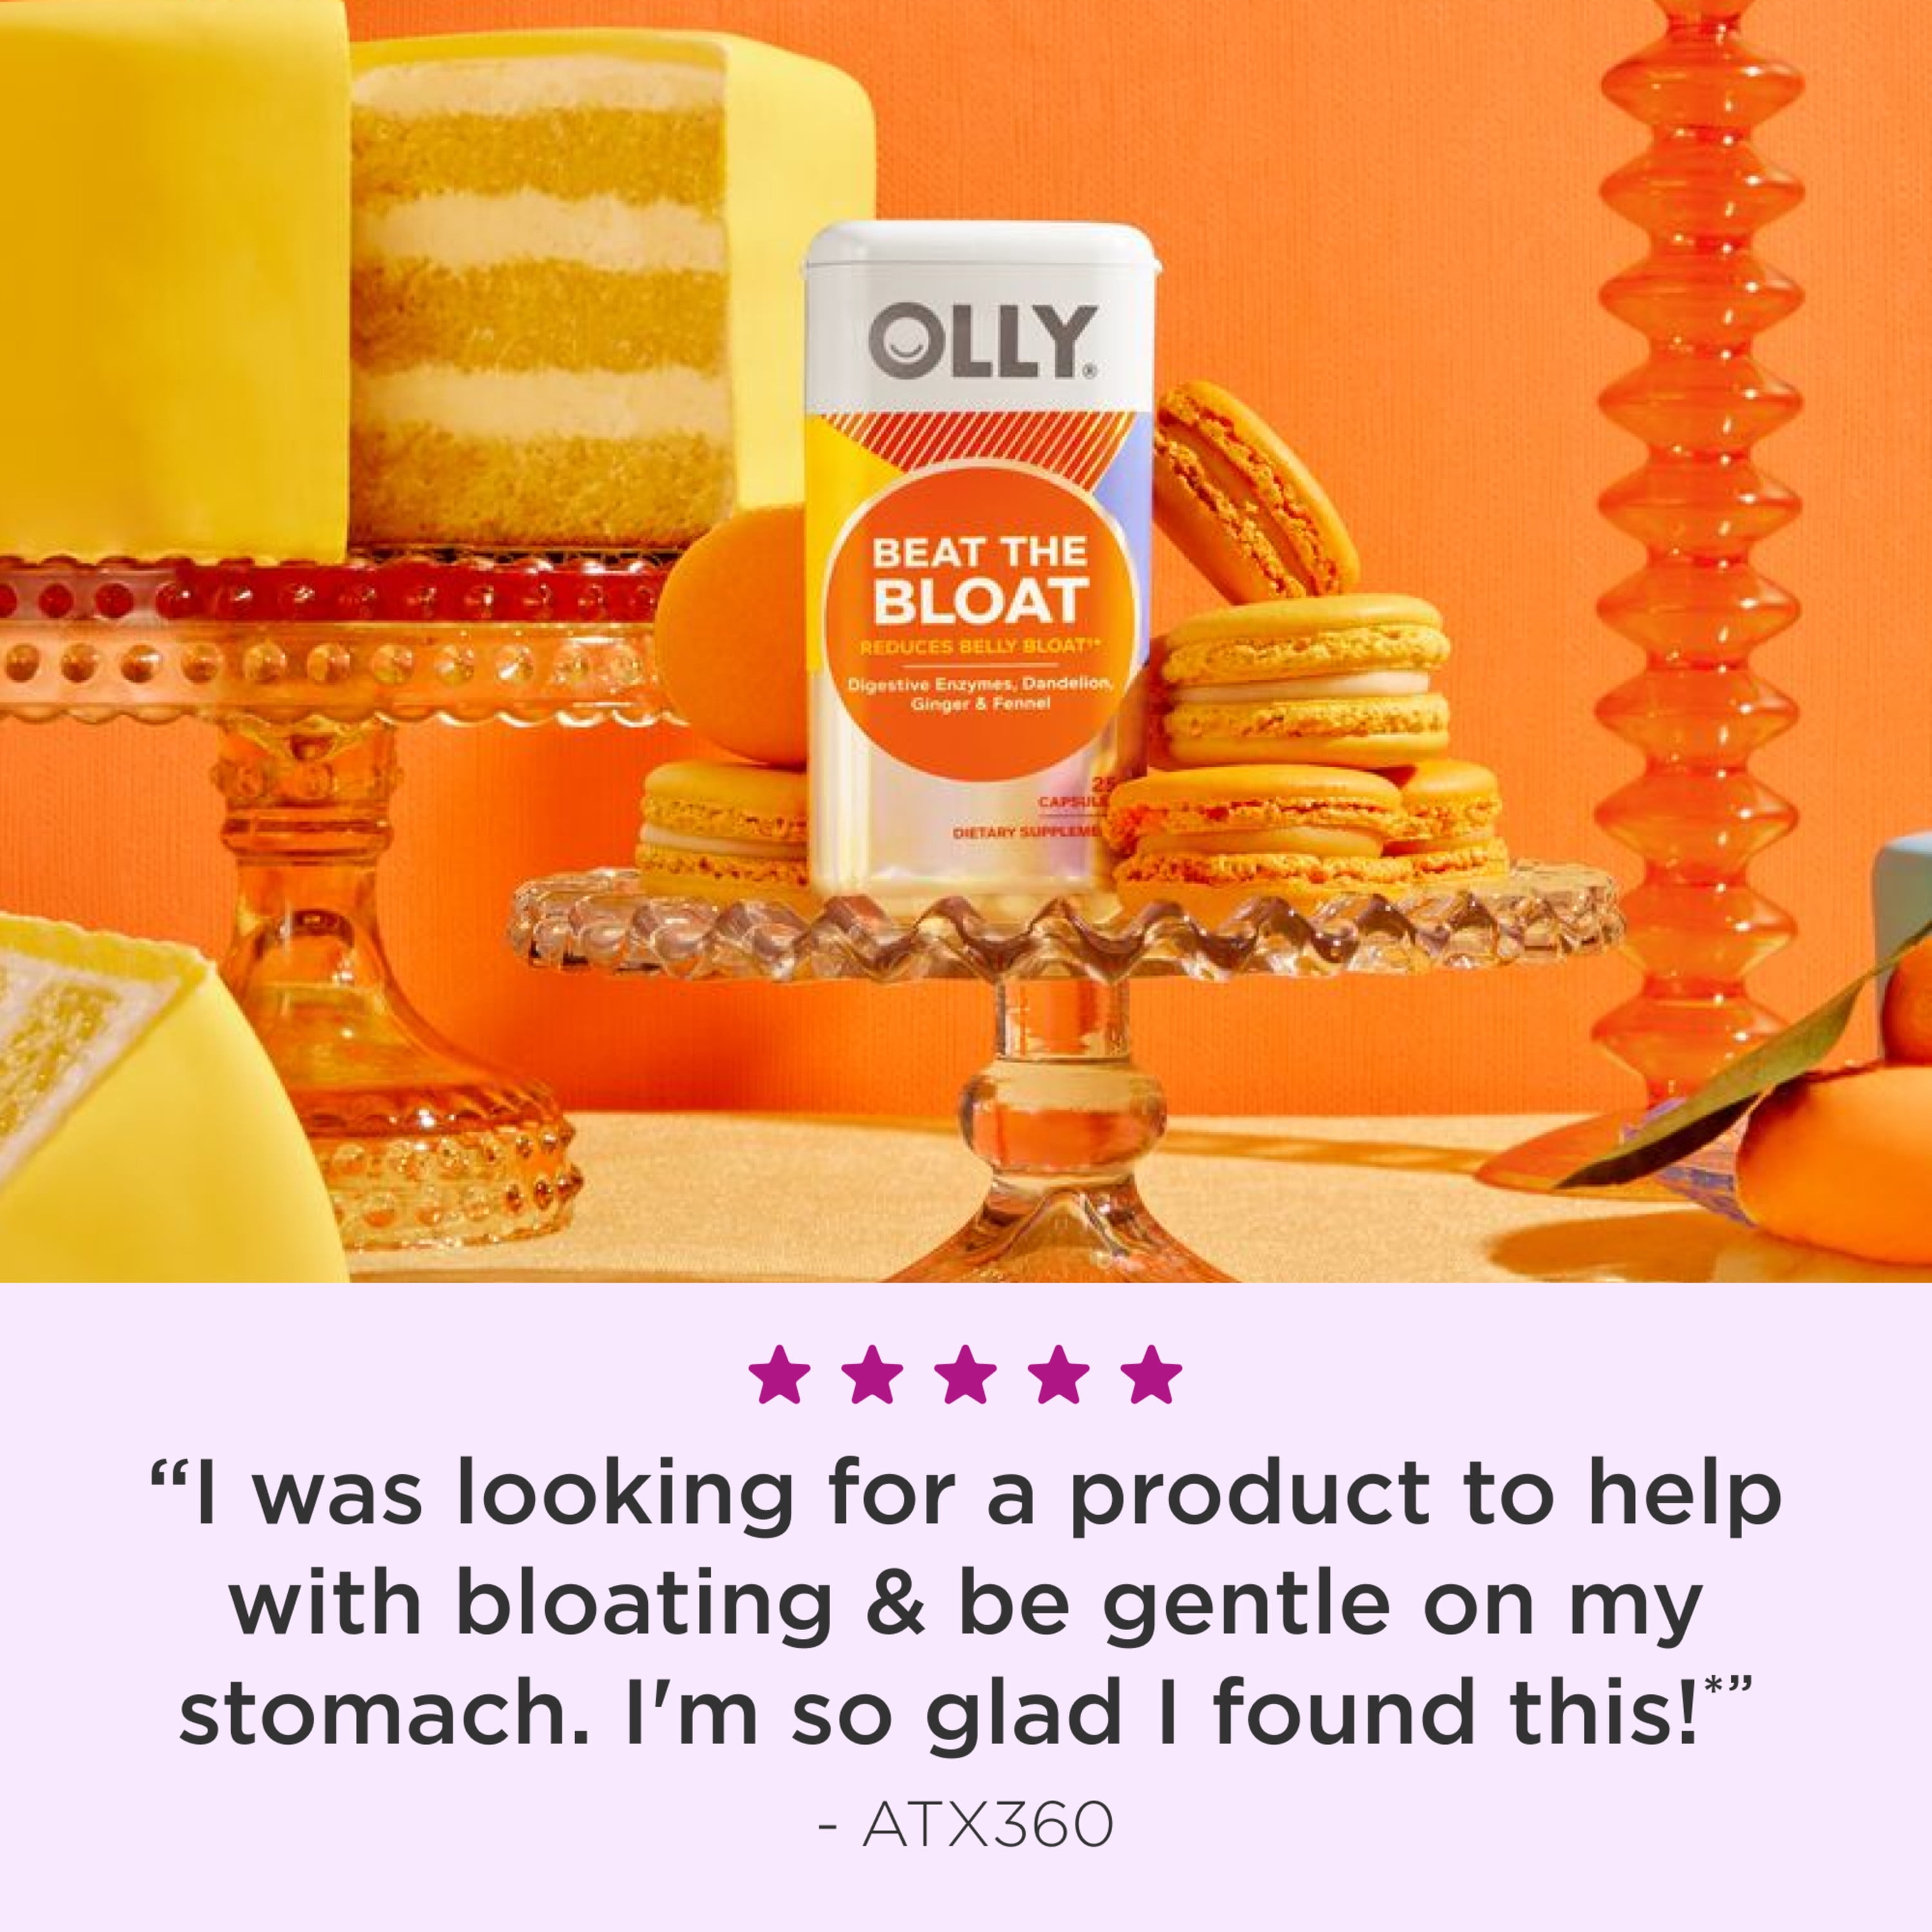 OLLY Beat the Bloat Capsule Supplement, Digestive Enzyme Support